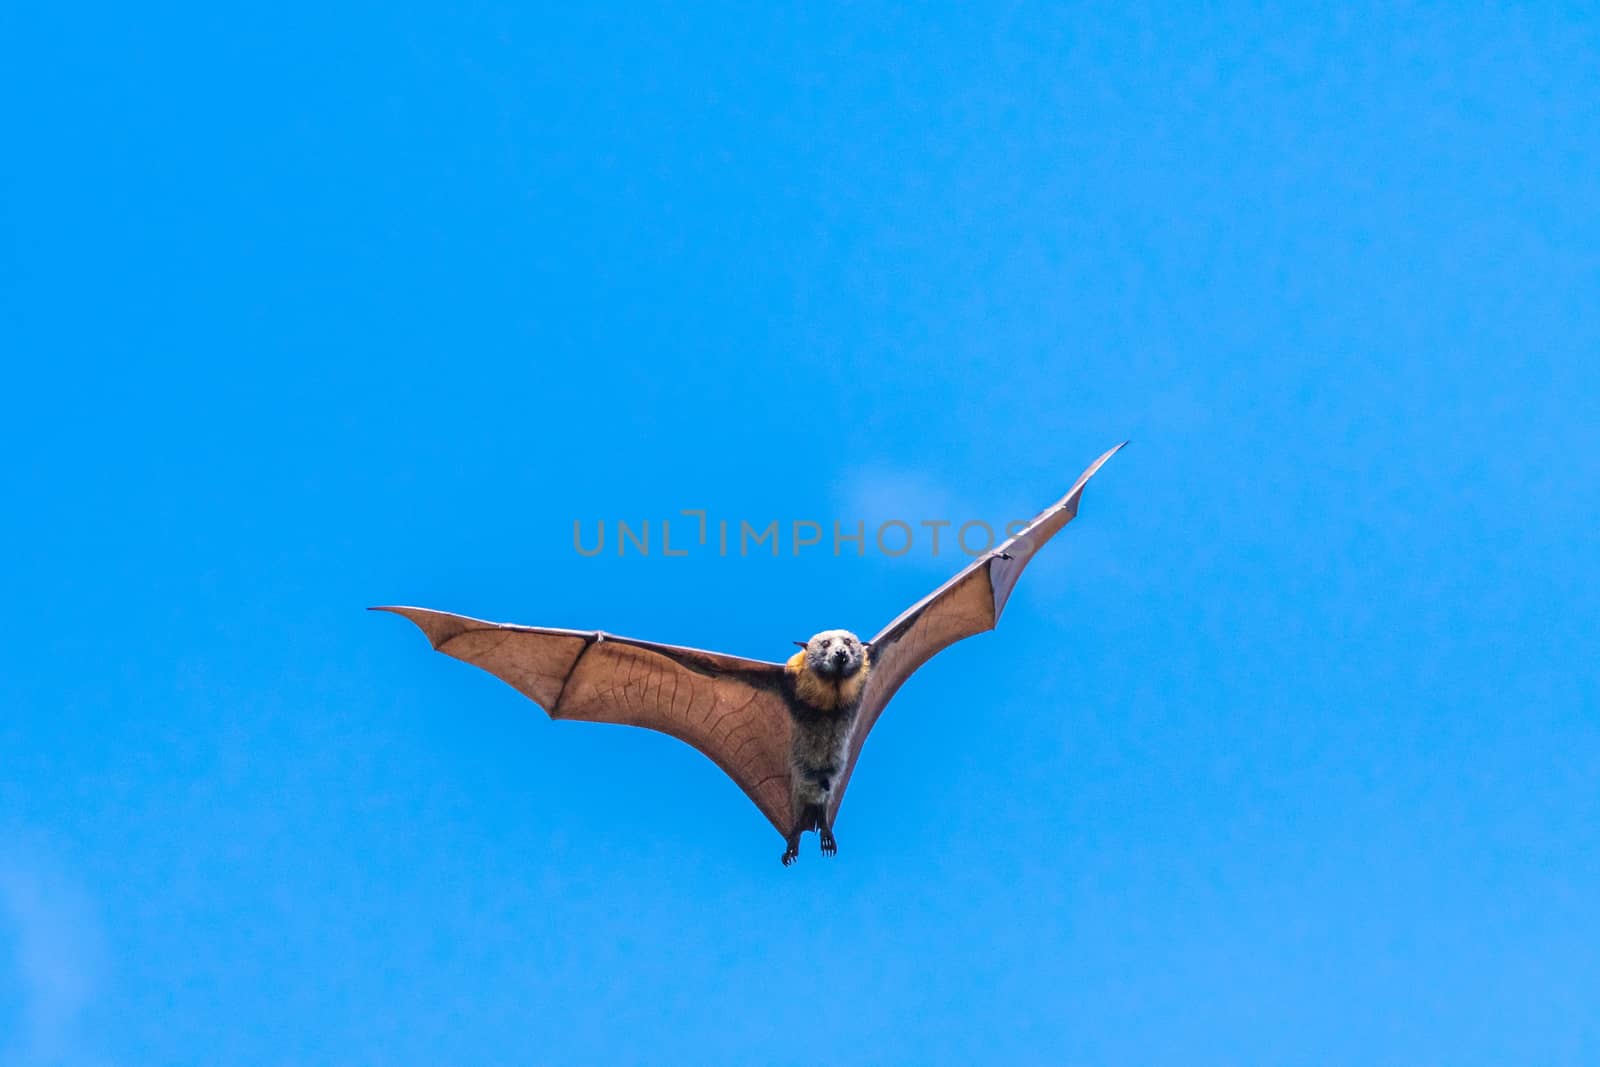 An Australian fruit bat flying between trees with fully open wings in a sunny day with a blue sky